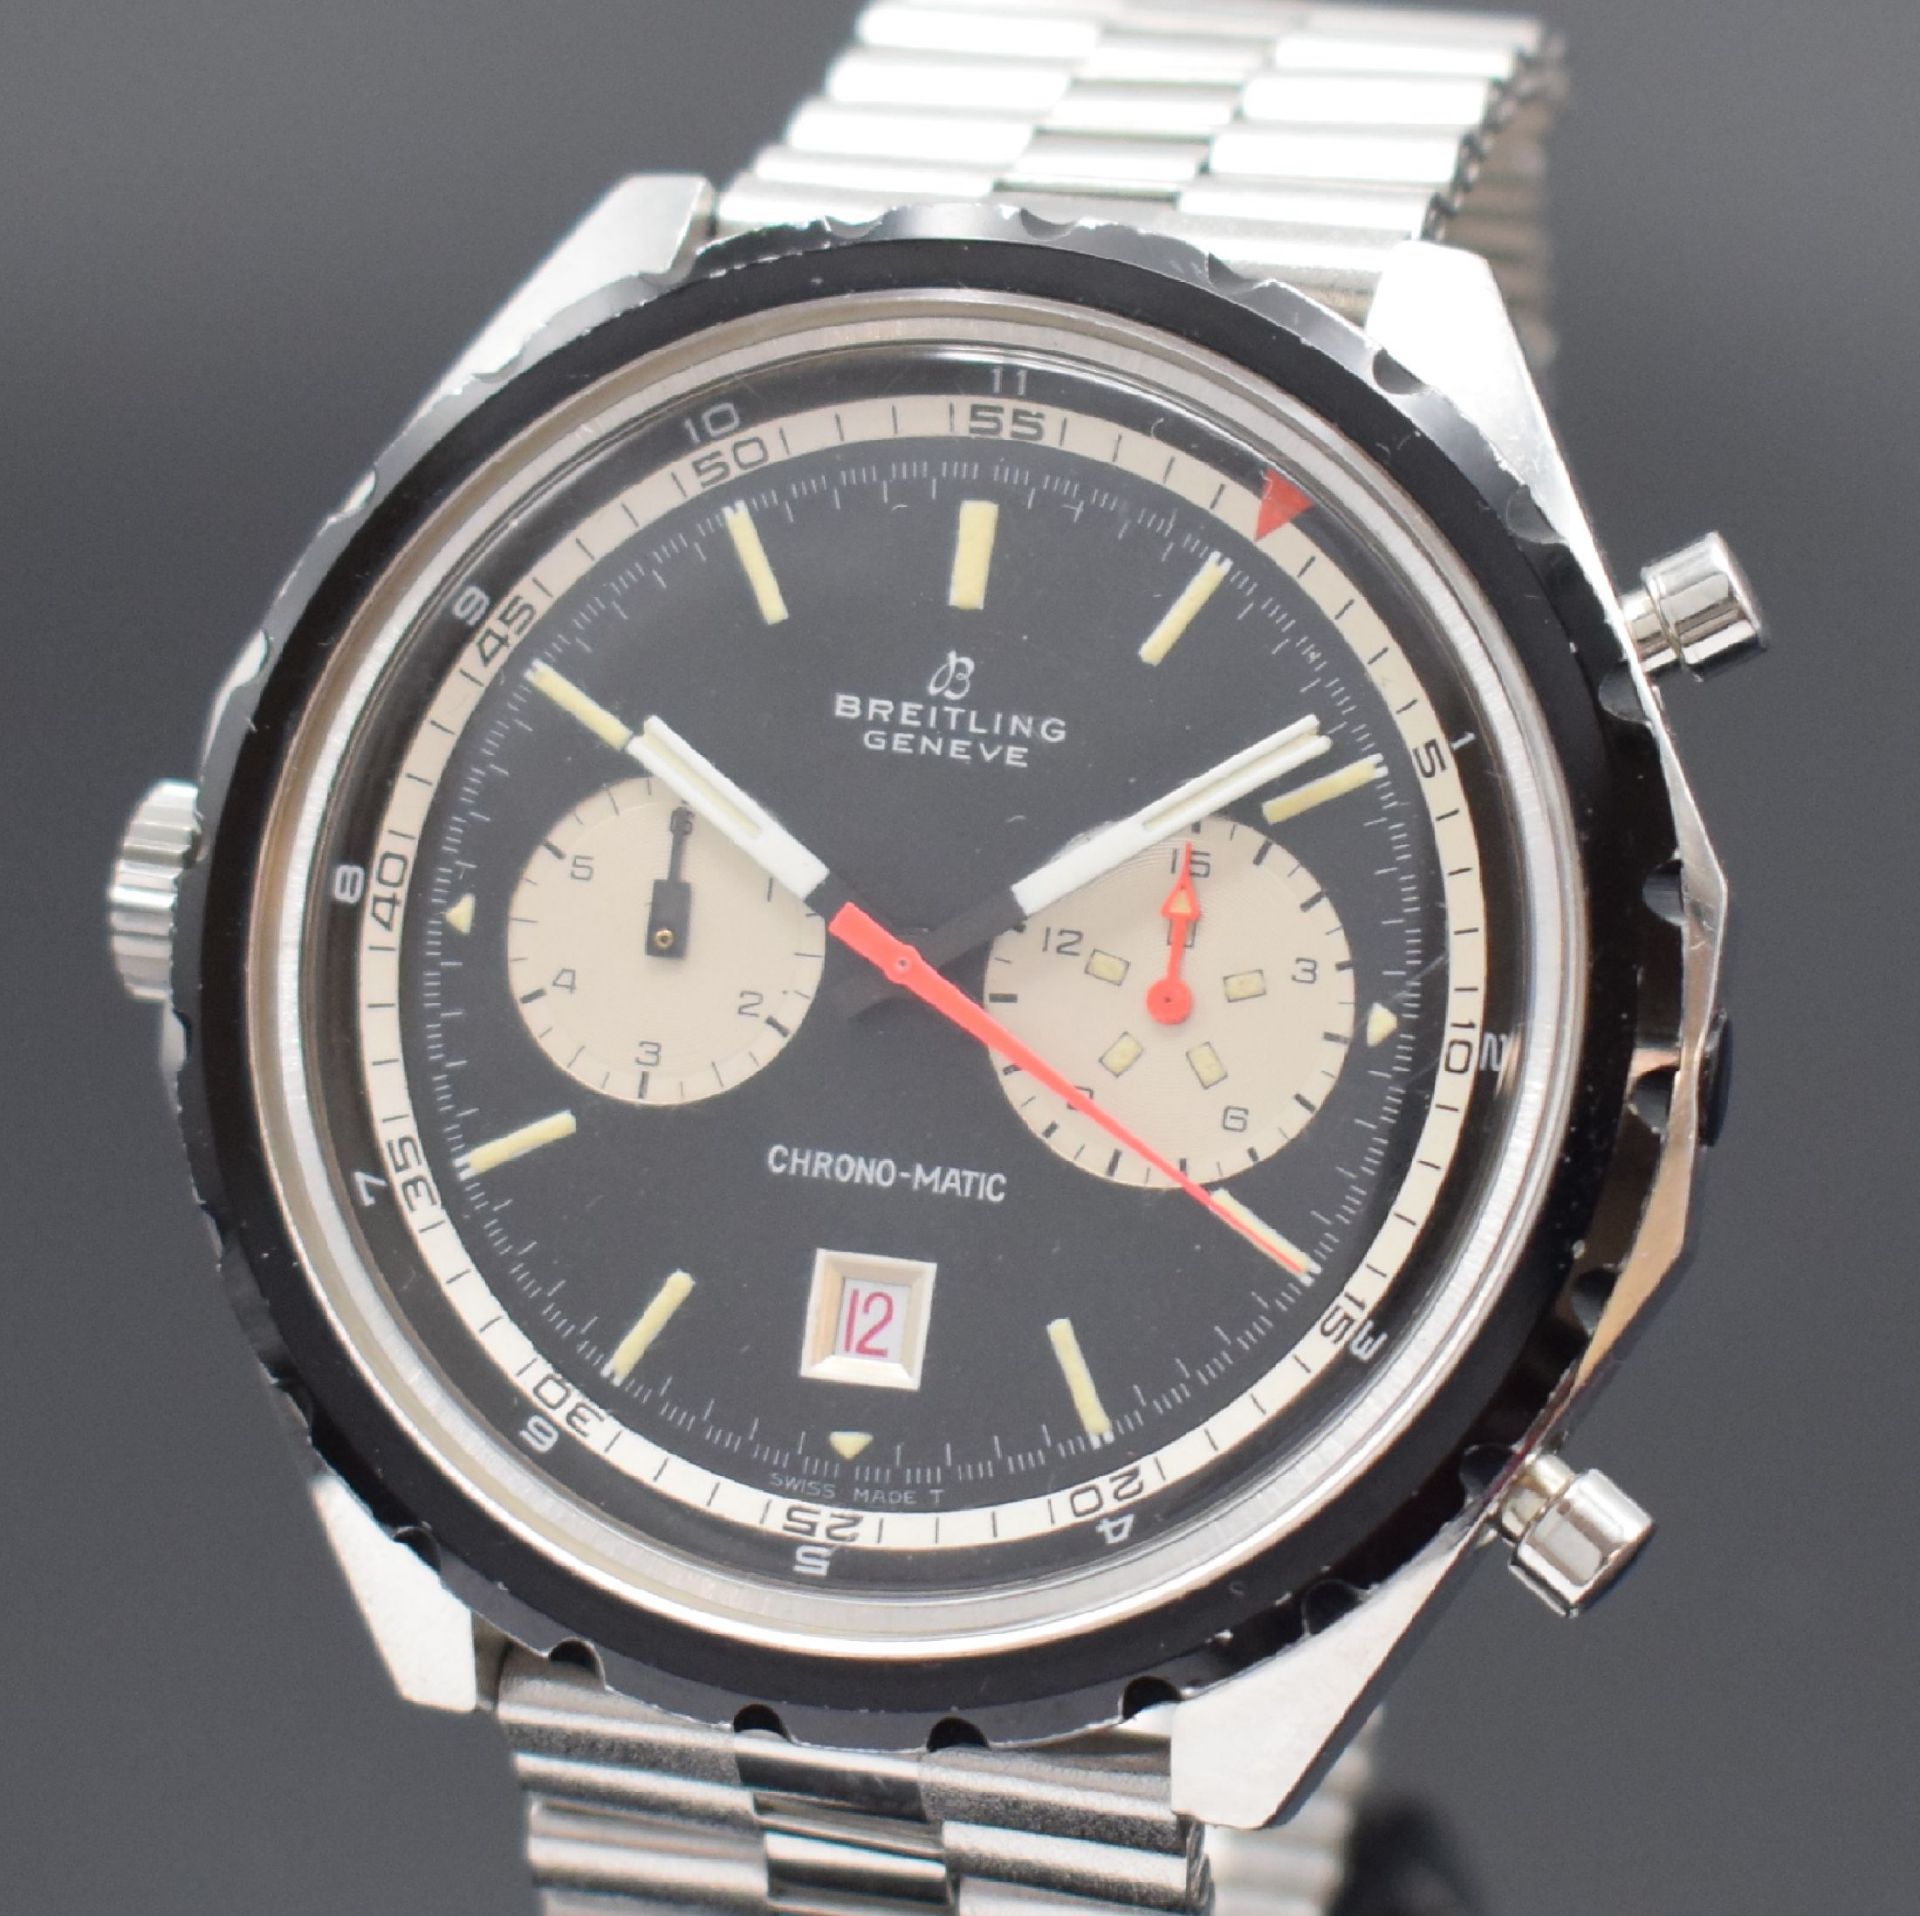 BREITLING Chrono-Matic Referenz 7651 seltener - Image 2 of 5